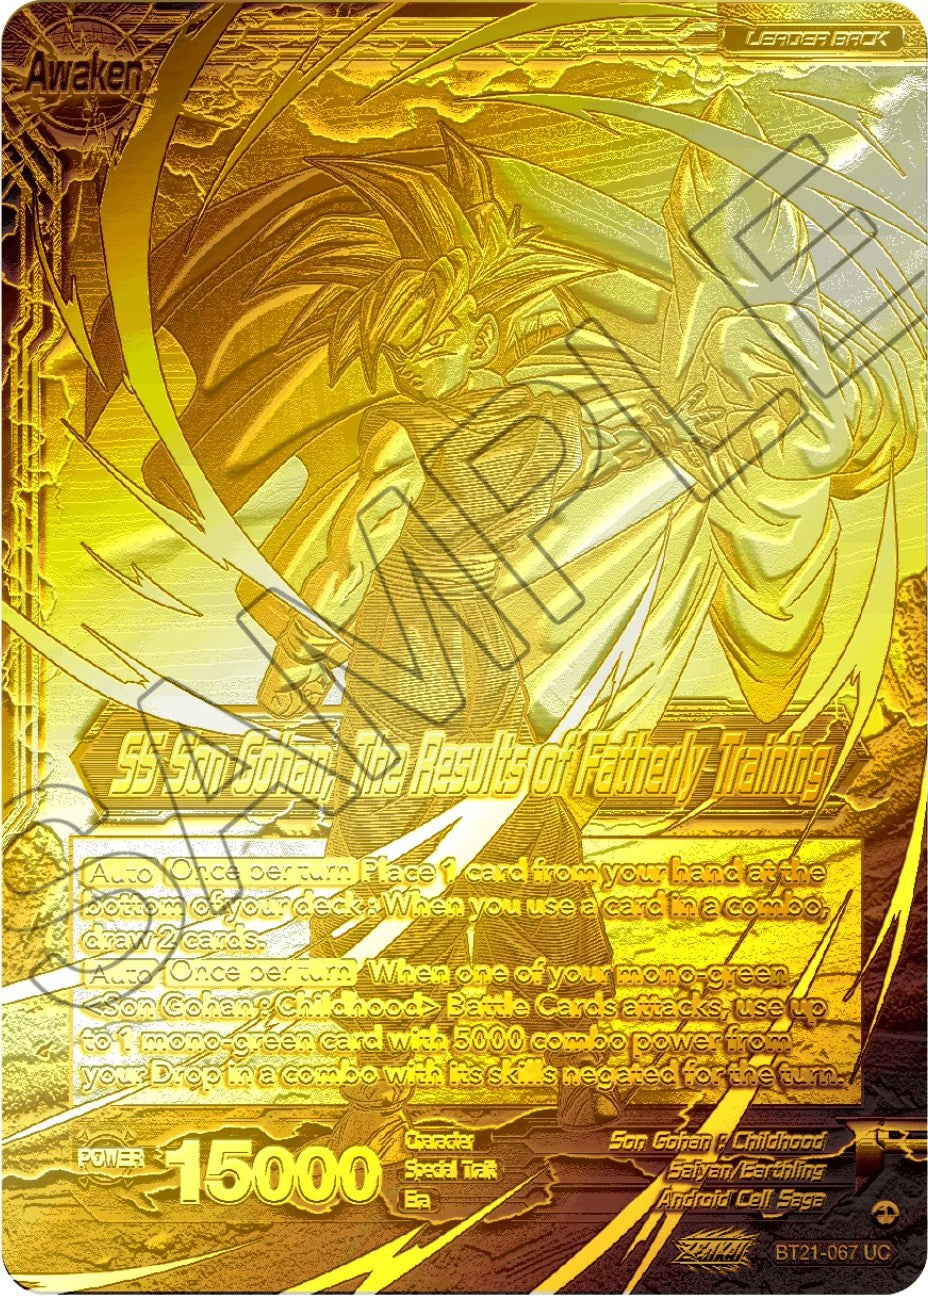 Son Gohan // SS Son Gohan, The Results of Fatherly Training (2023 Championship Finals) (Gold Metal Foil) (BT21-067) [Tournament Promotion Cards] | Black Swamp Games